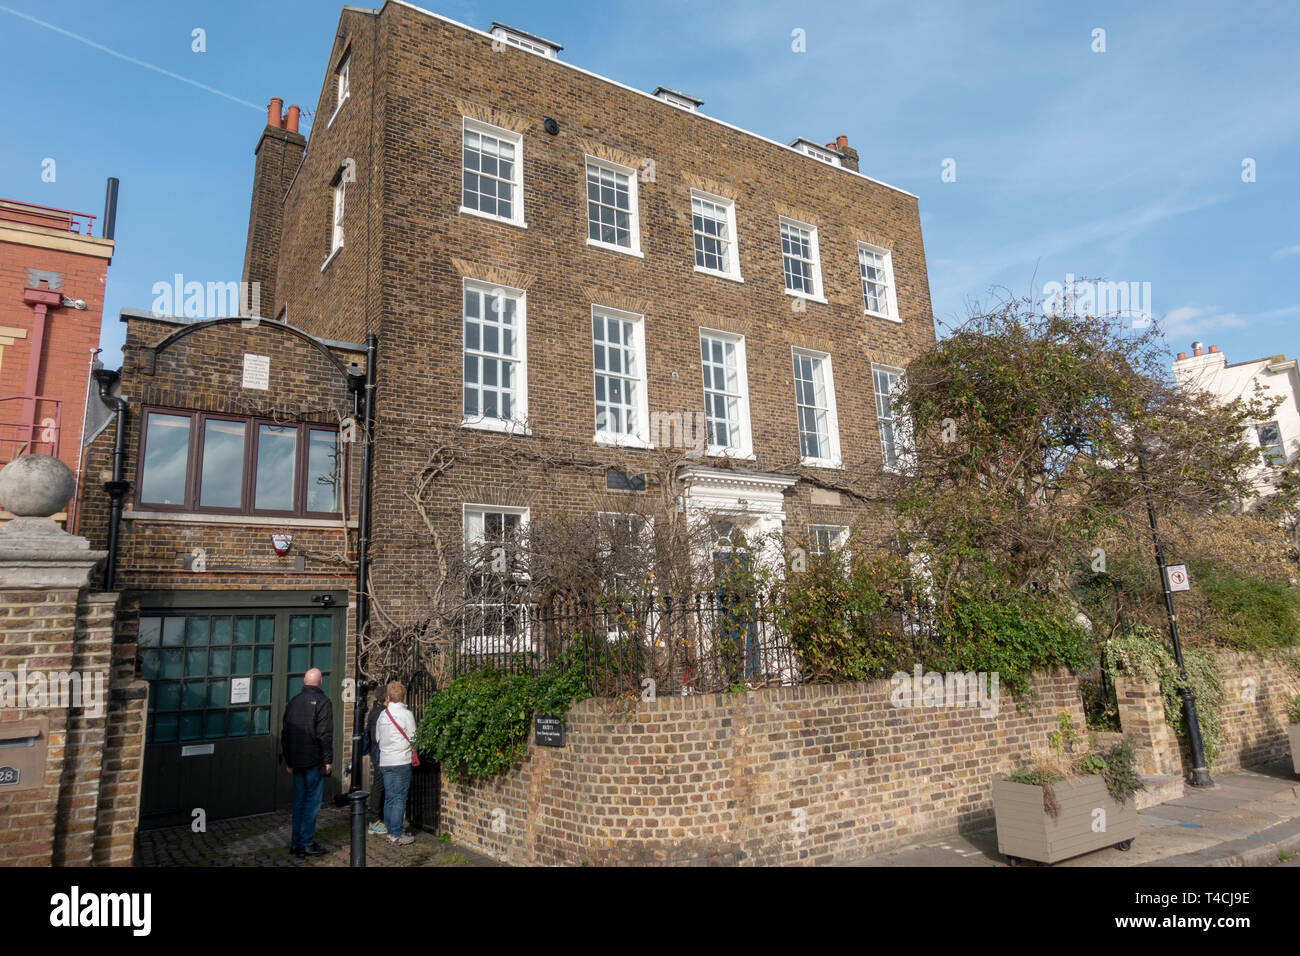 Kelmscott House, home to the William Morris Society on the Thames Path, Upper Mall, River Thames, London, UK. Stock Photo